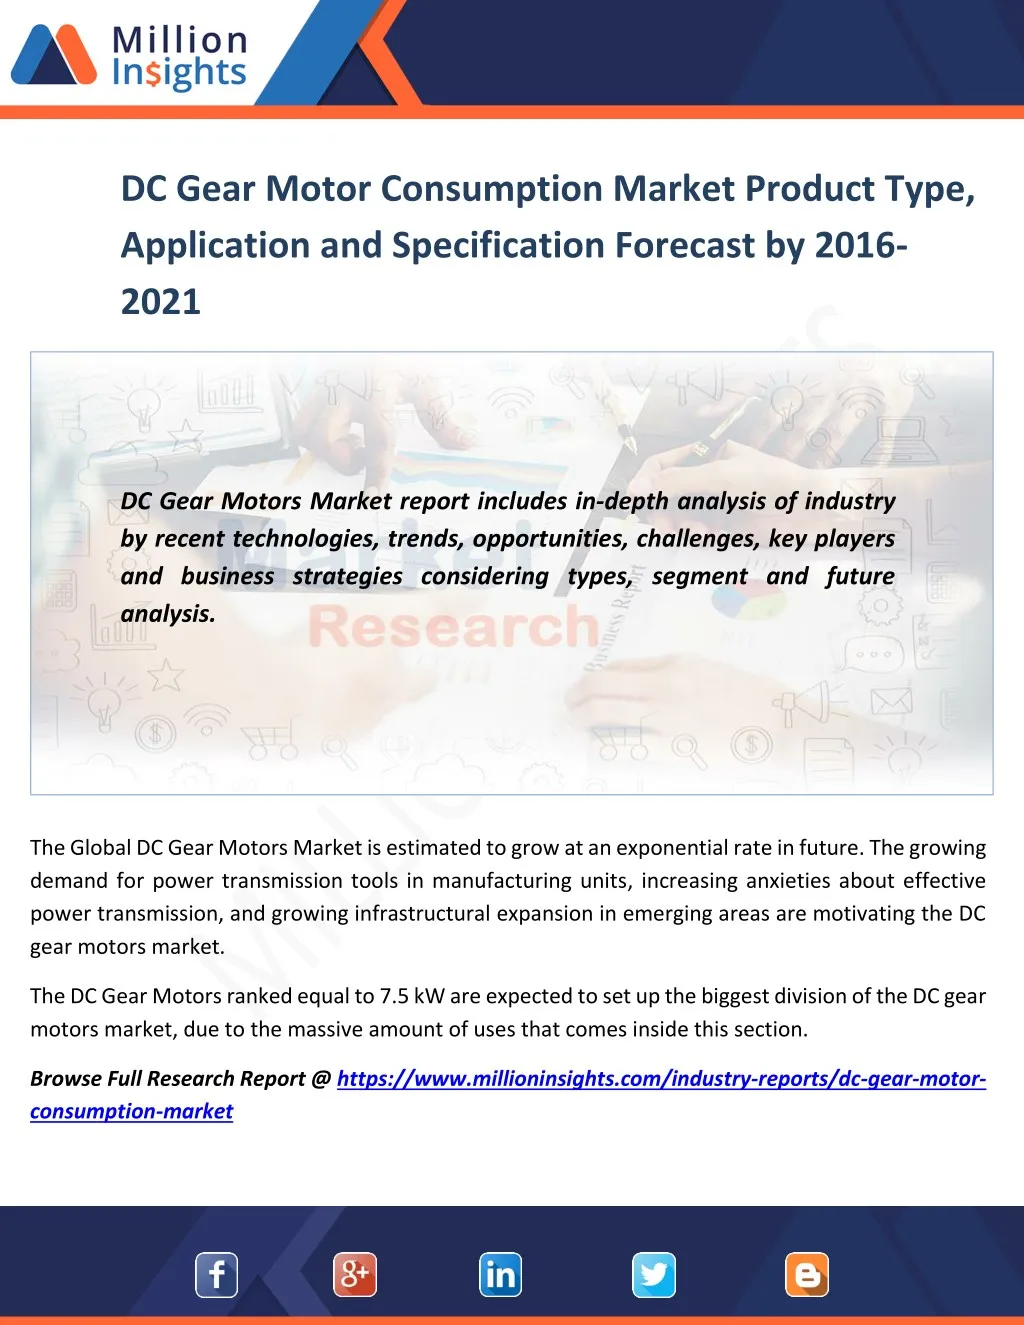 dc gear motor consumption market product type